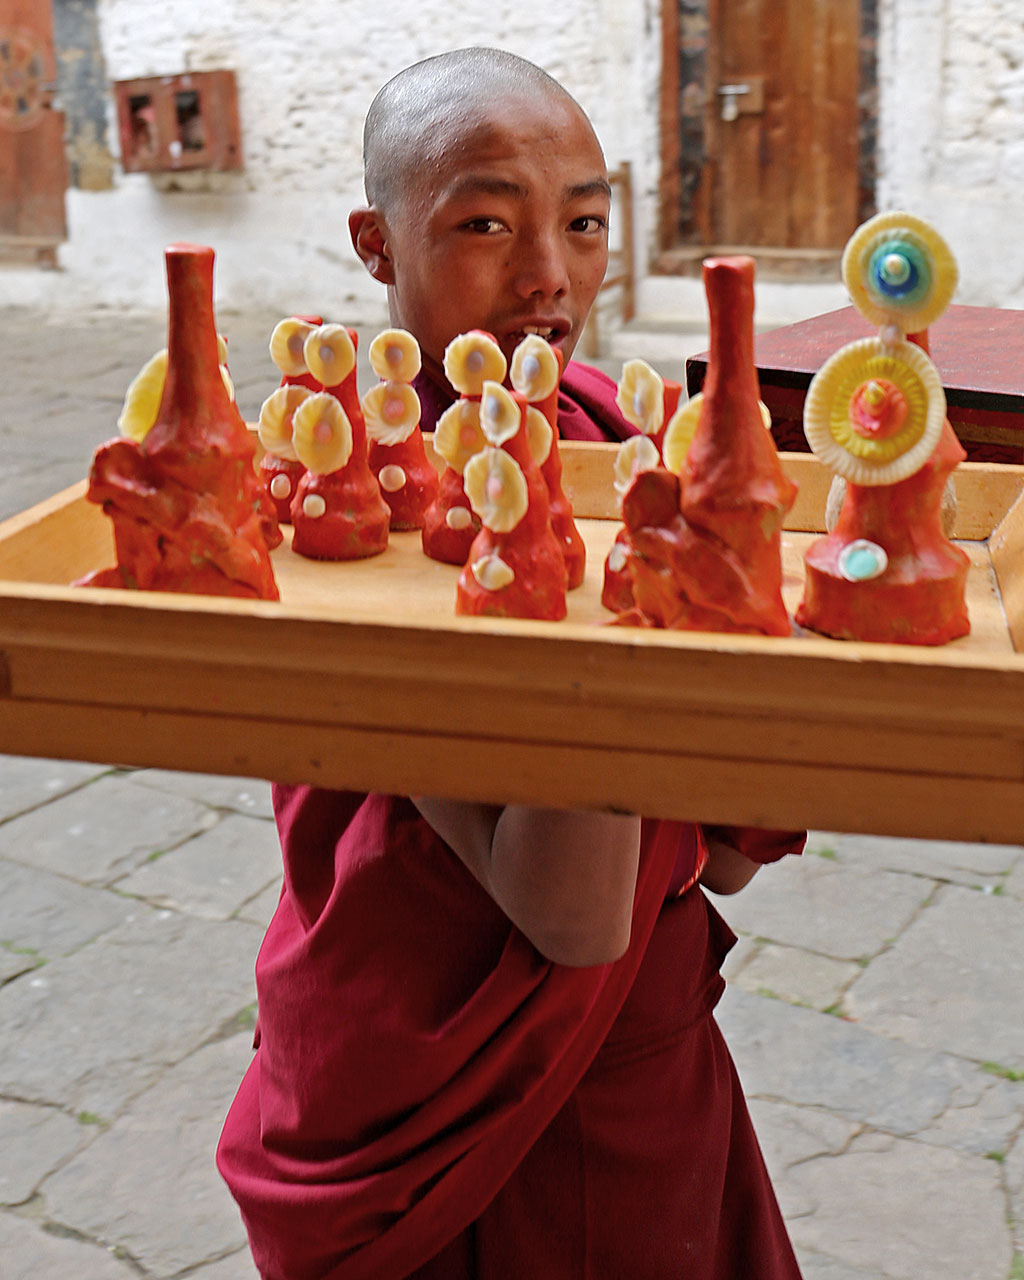 The monks work and his art.